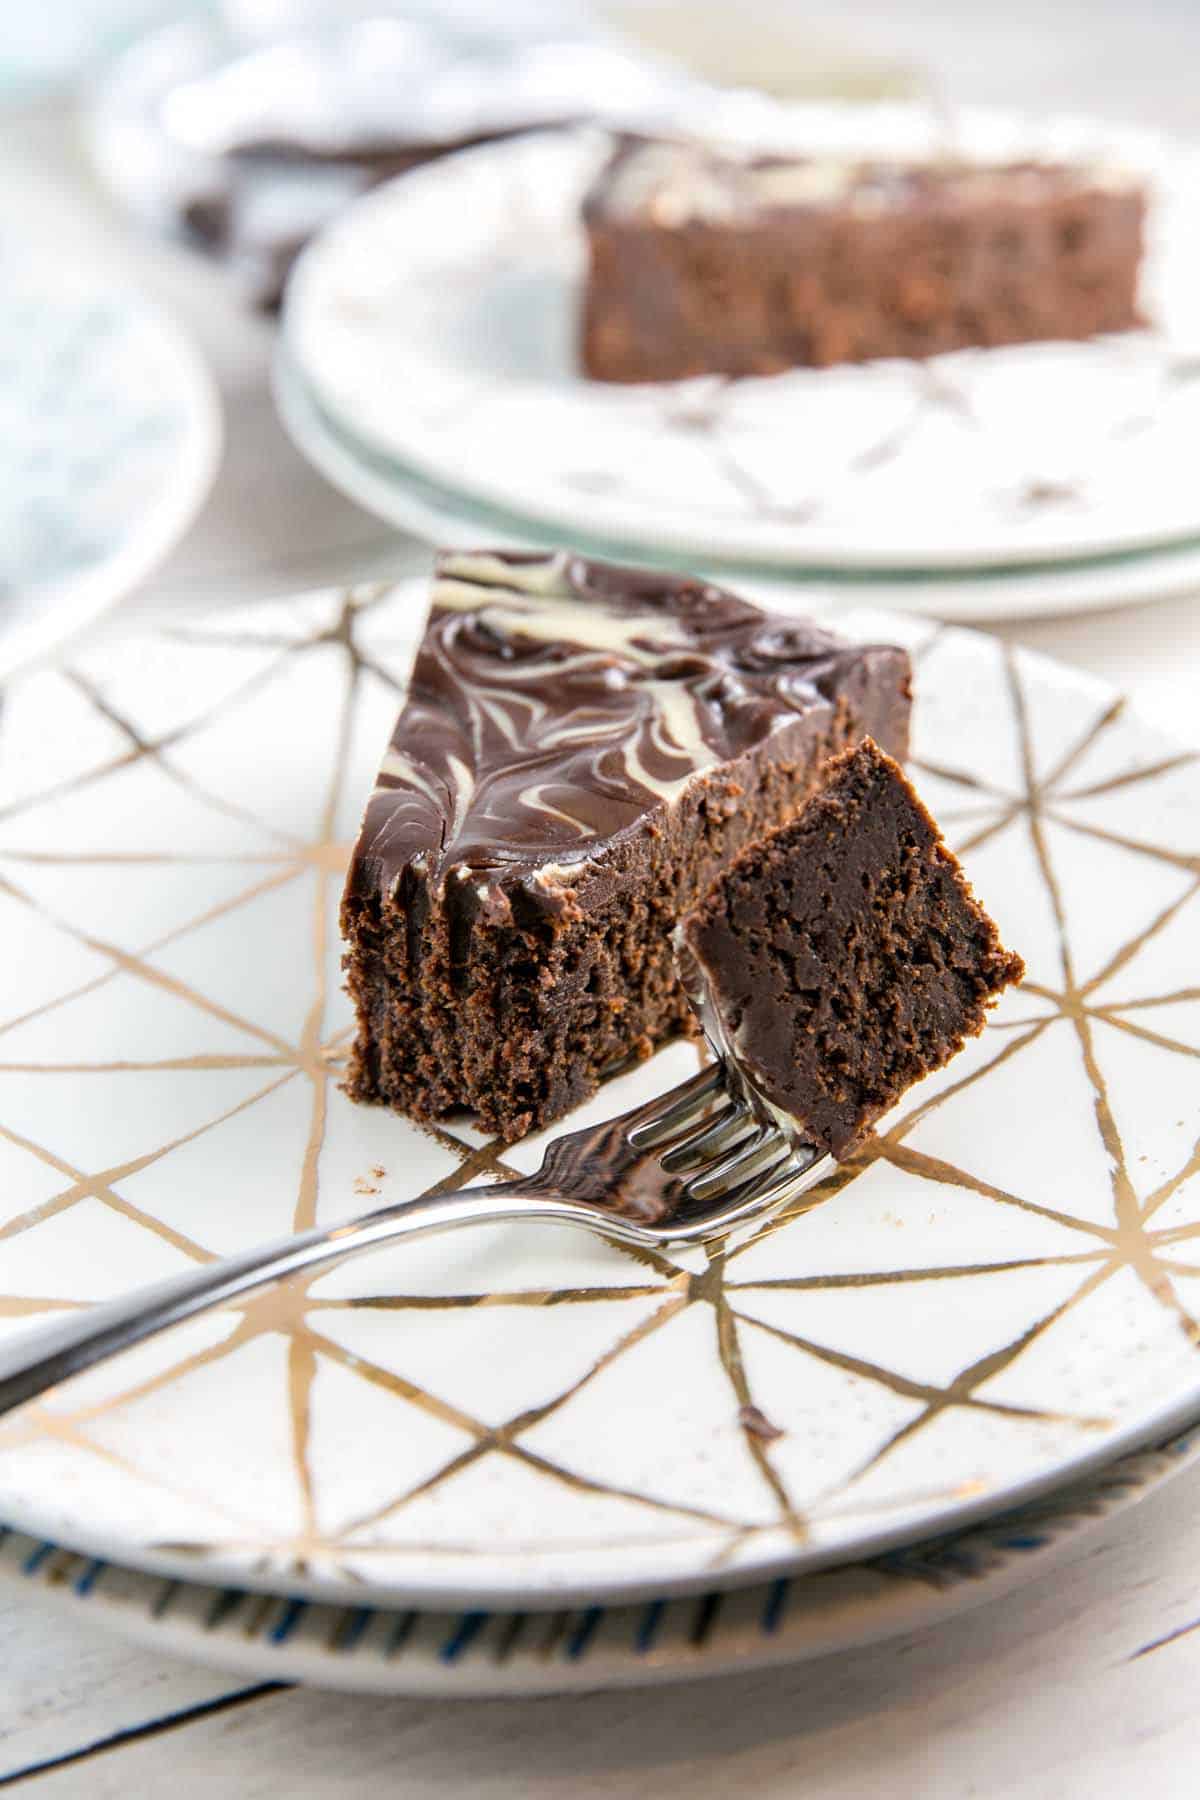 Flourless Chocolate Tahini Cake: Gluten free, Passover friendly, delicious all the time. A rich, decadent flourless chocolate cake with swirls of tahini make an easy, elegant cake. {Bunsen Burner Bakery} #glutenfree #passover #tahini #cake